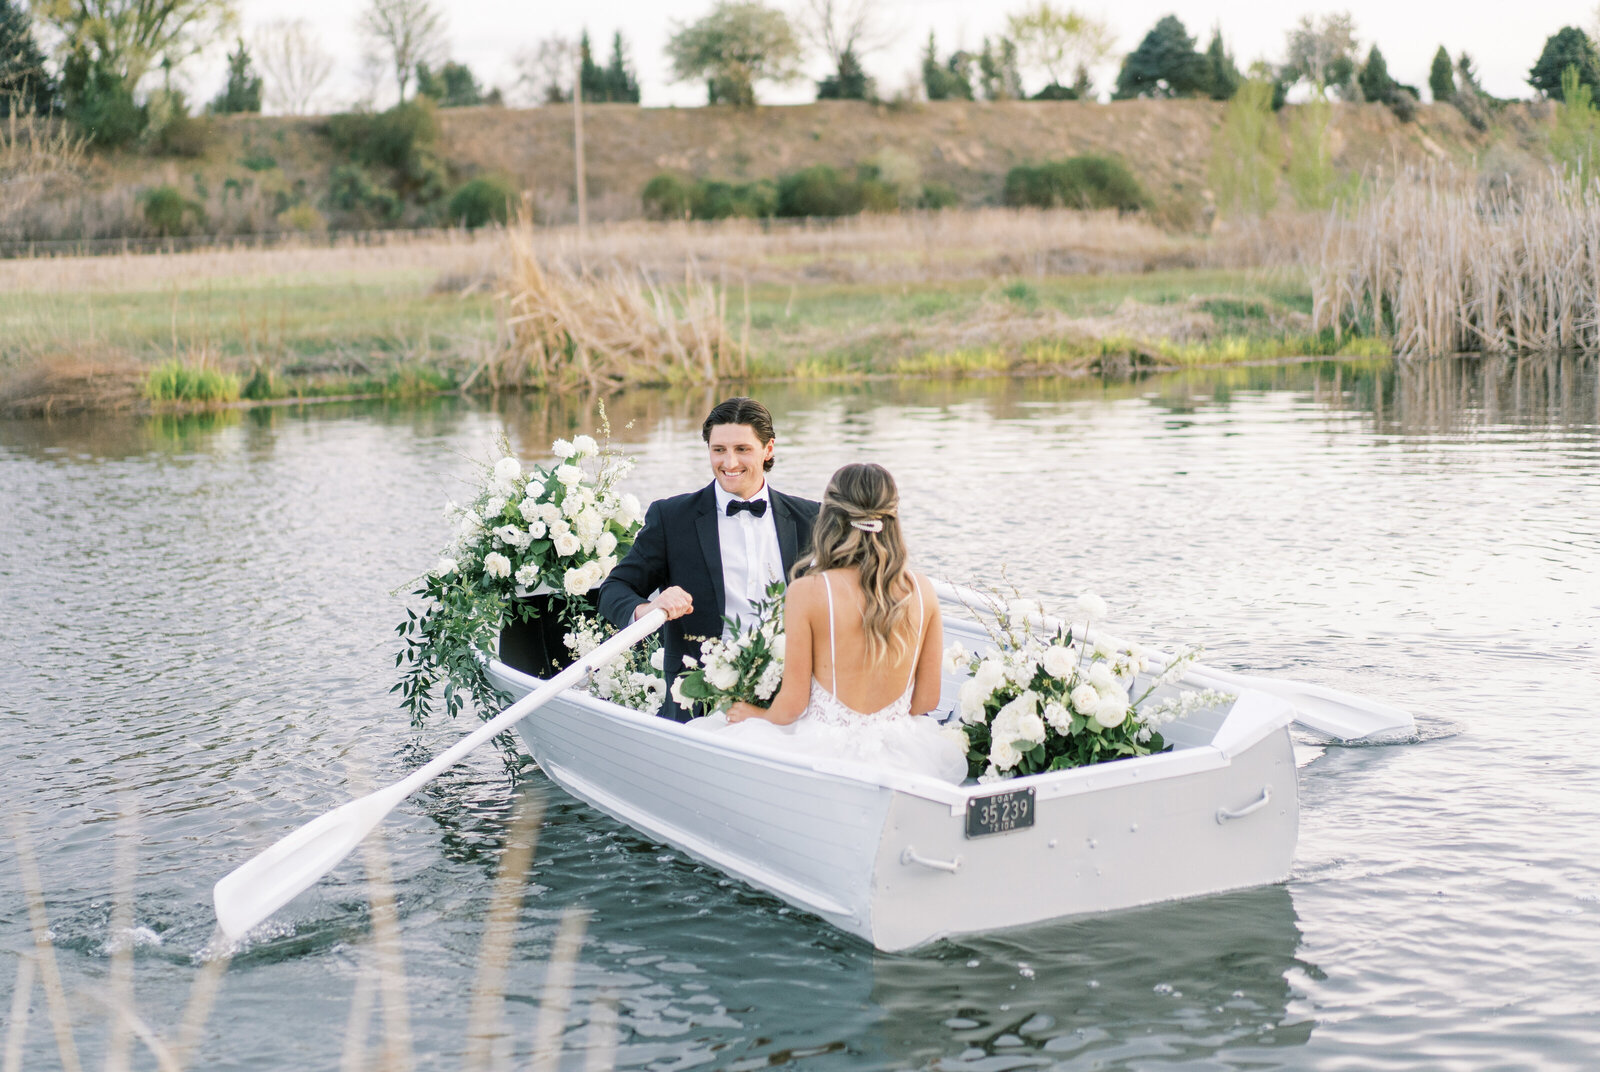 Portrait of a bride and groom wearing a white wedding gown and black tuxedo sitting in a boat filled with flowers on a lake.